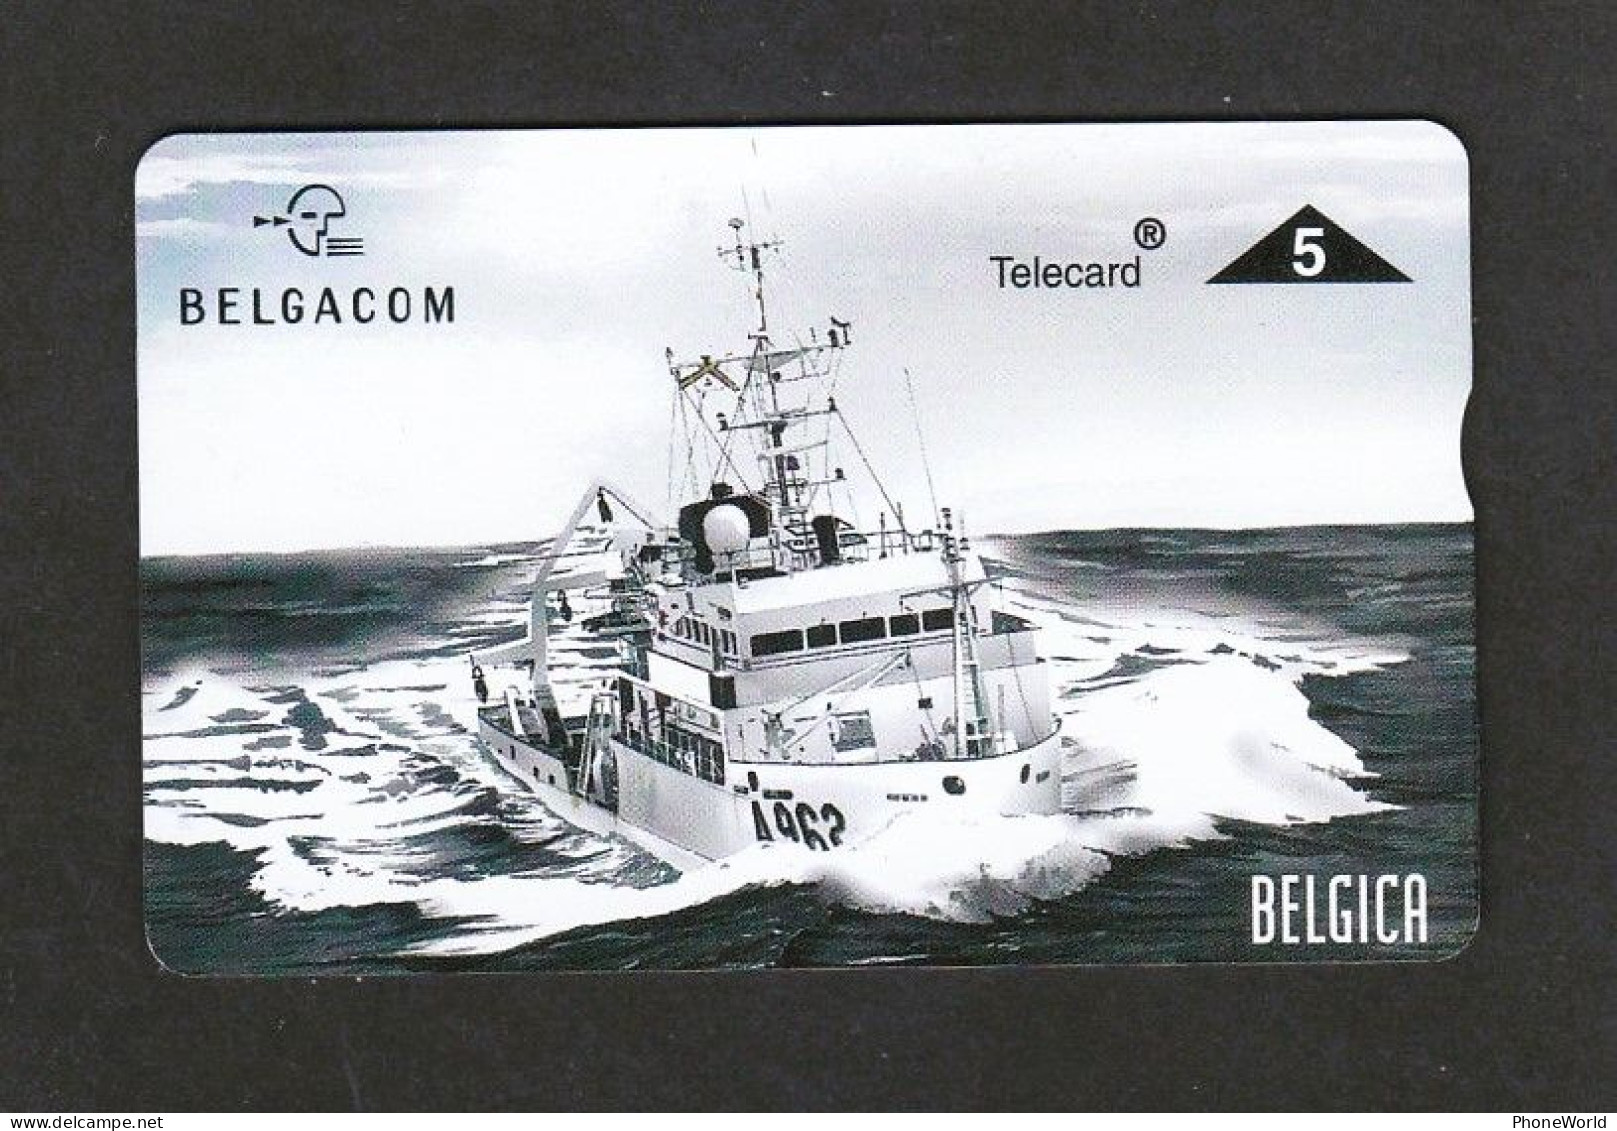 P551 - Belgica 2 - 706 L Mint - Ship - Army - Ohne Chip